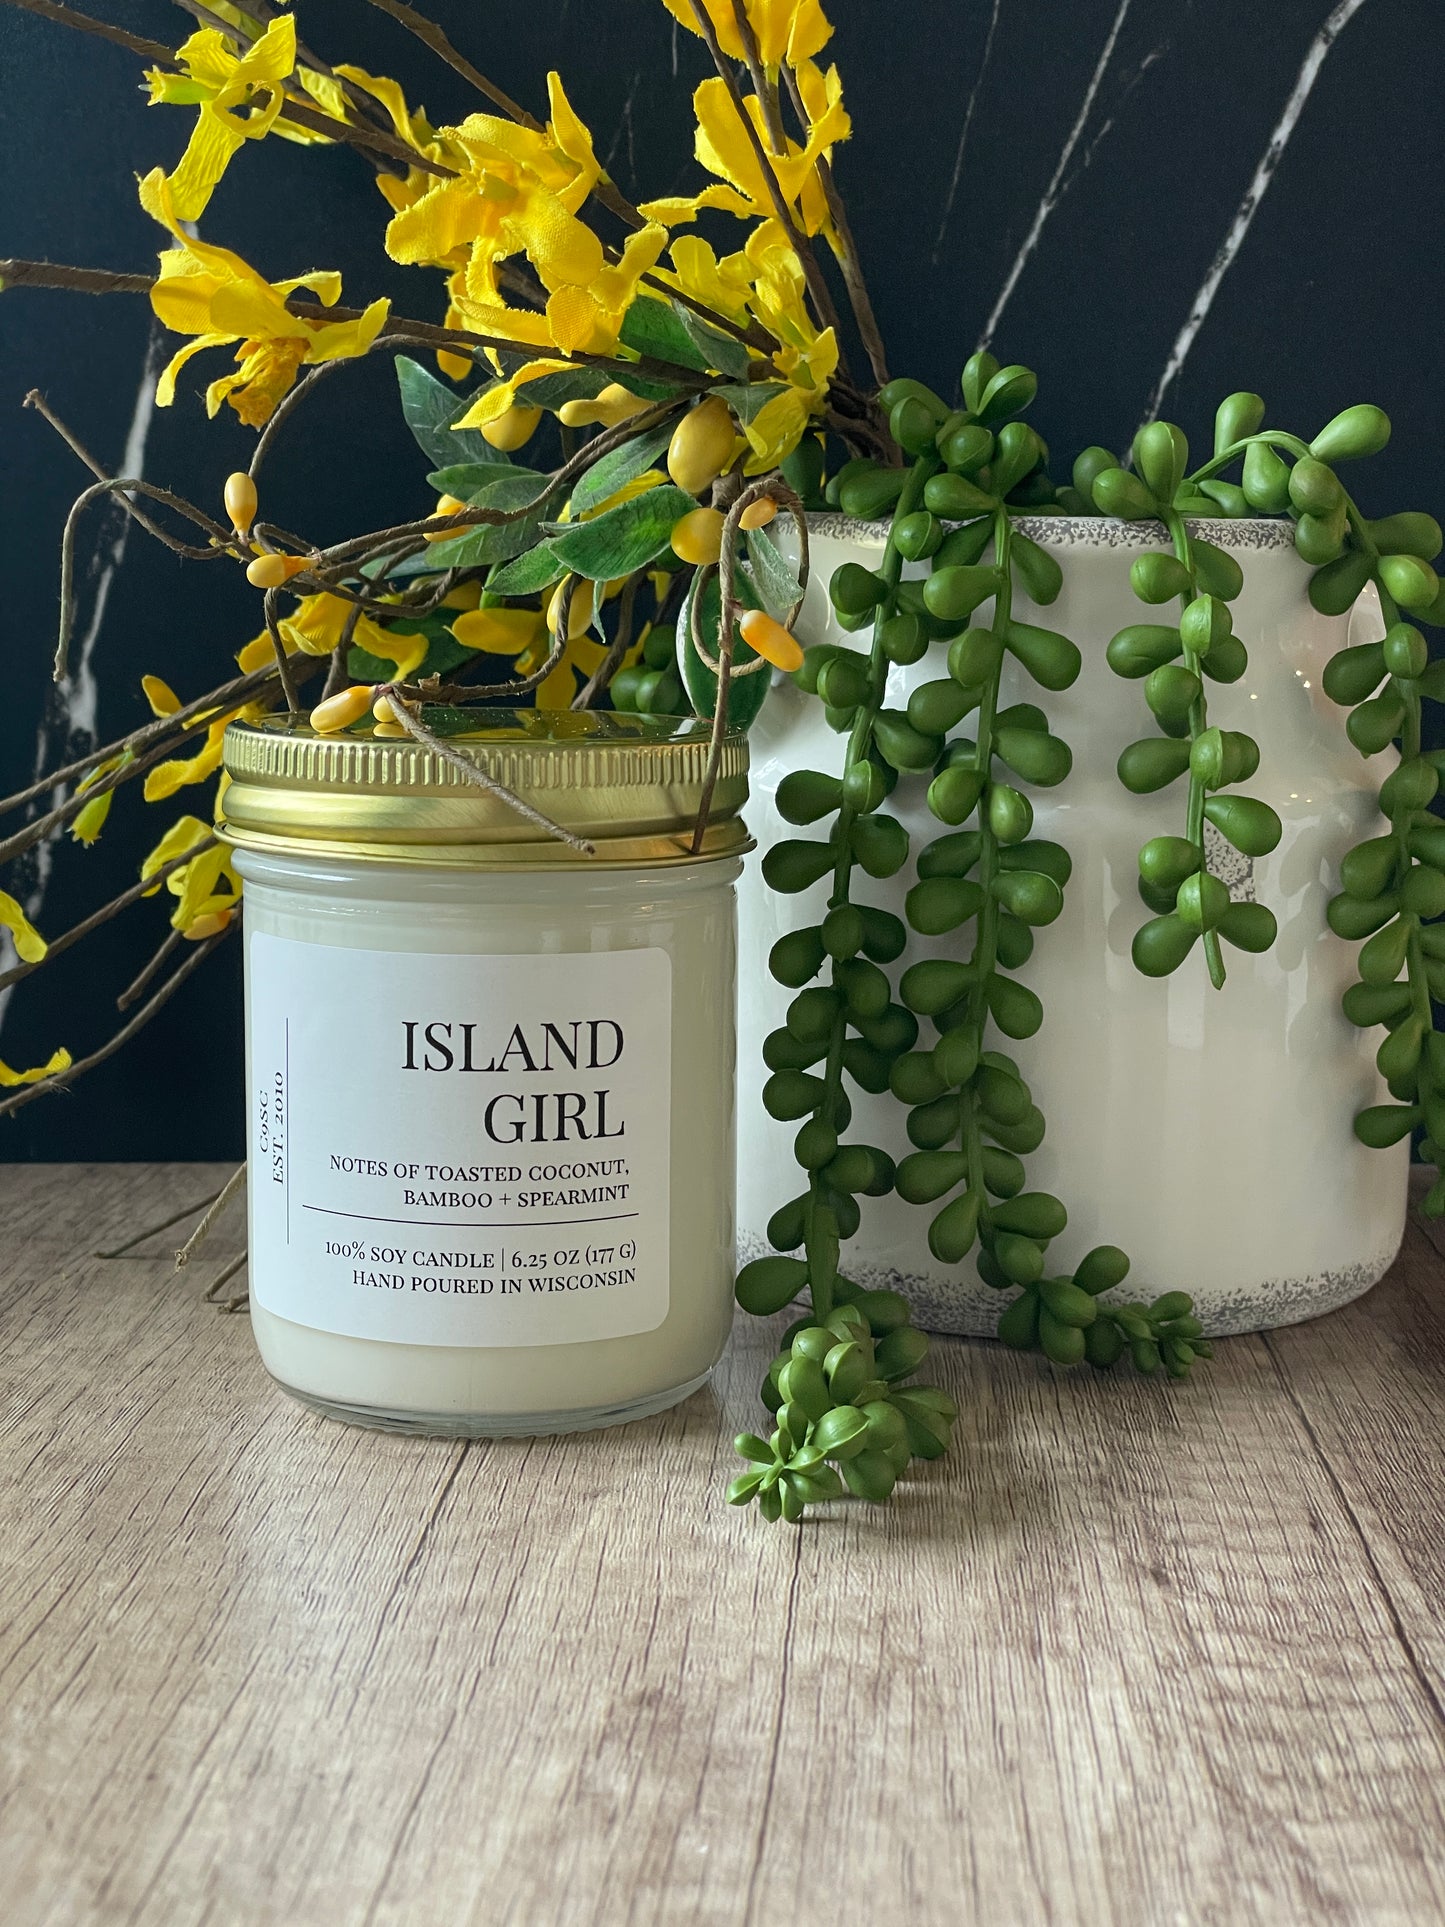 NEW! Island Girl Soy Candle: Toasted Coconut, Bamboo, Spearmint